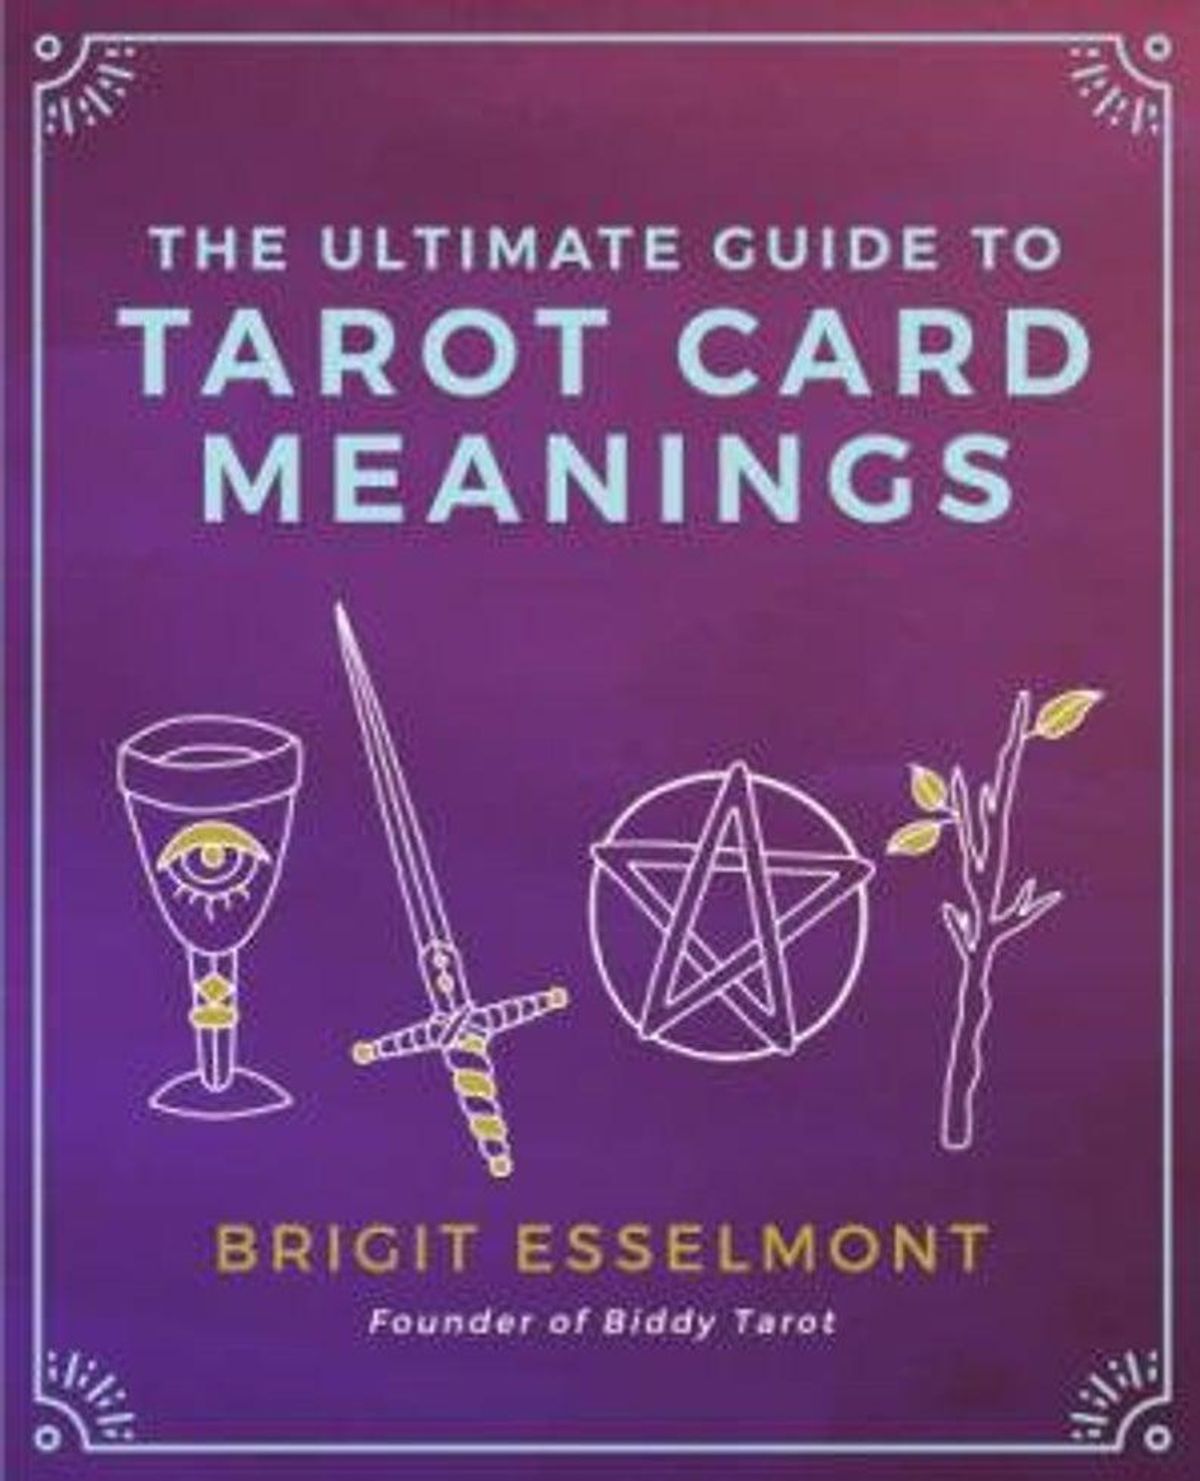 brigit esselmont the ultimate guide to tarot card meanings